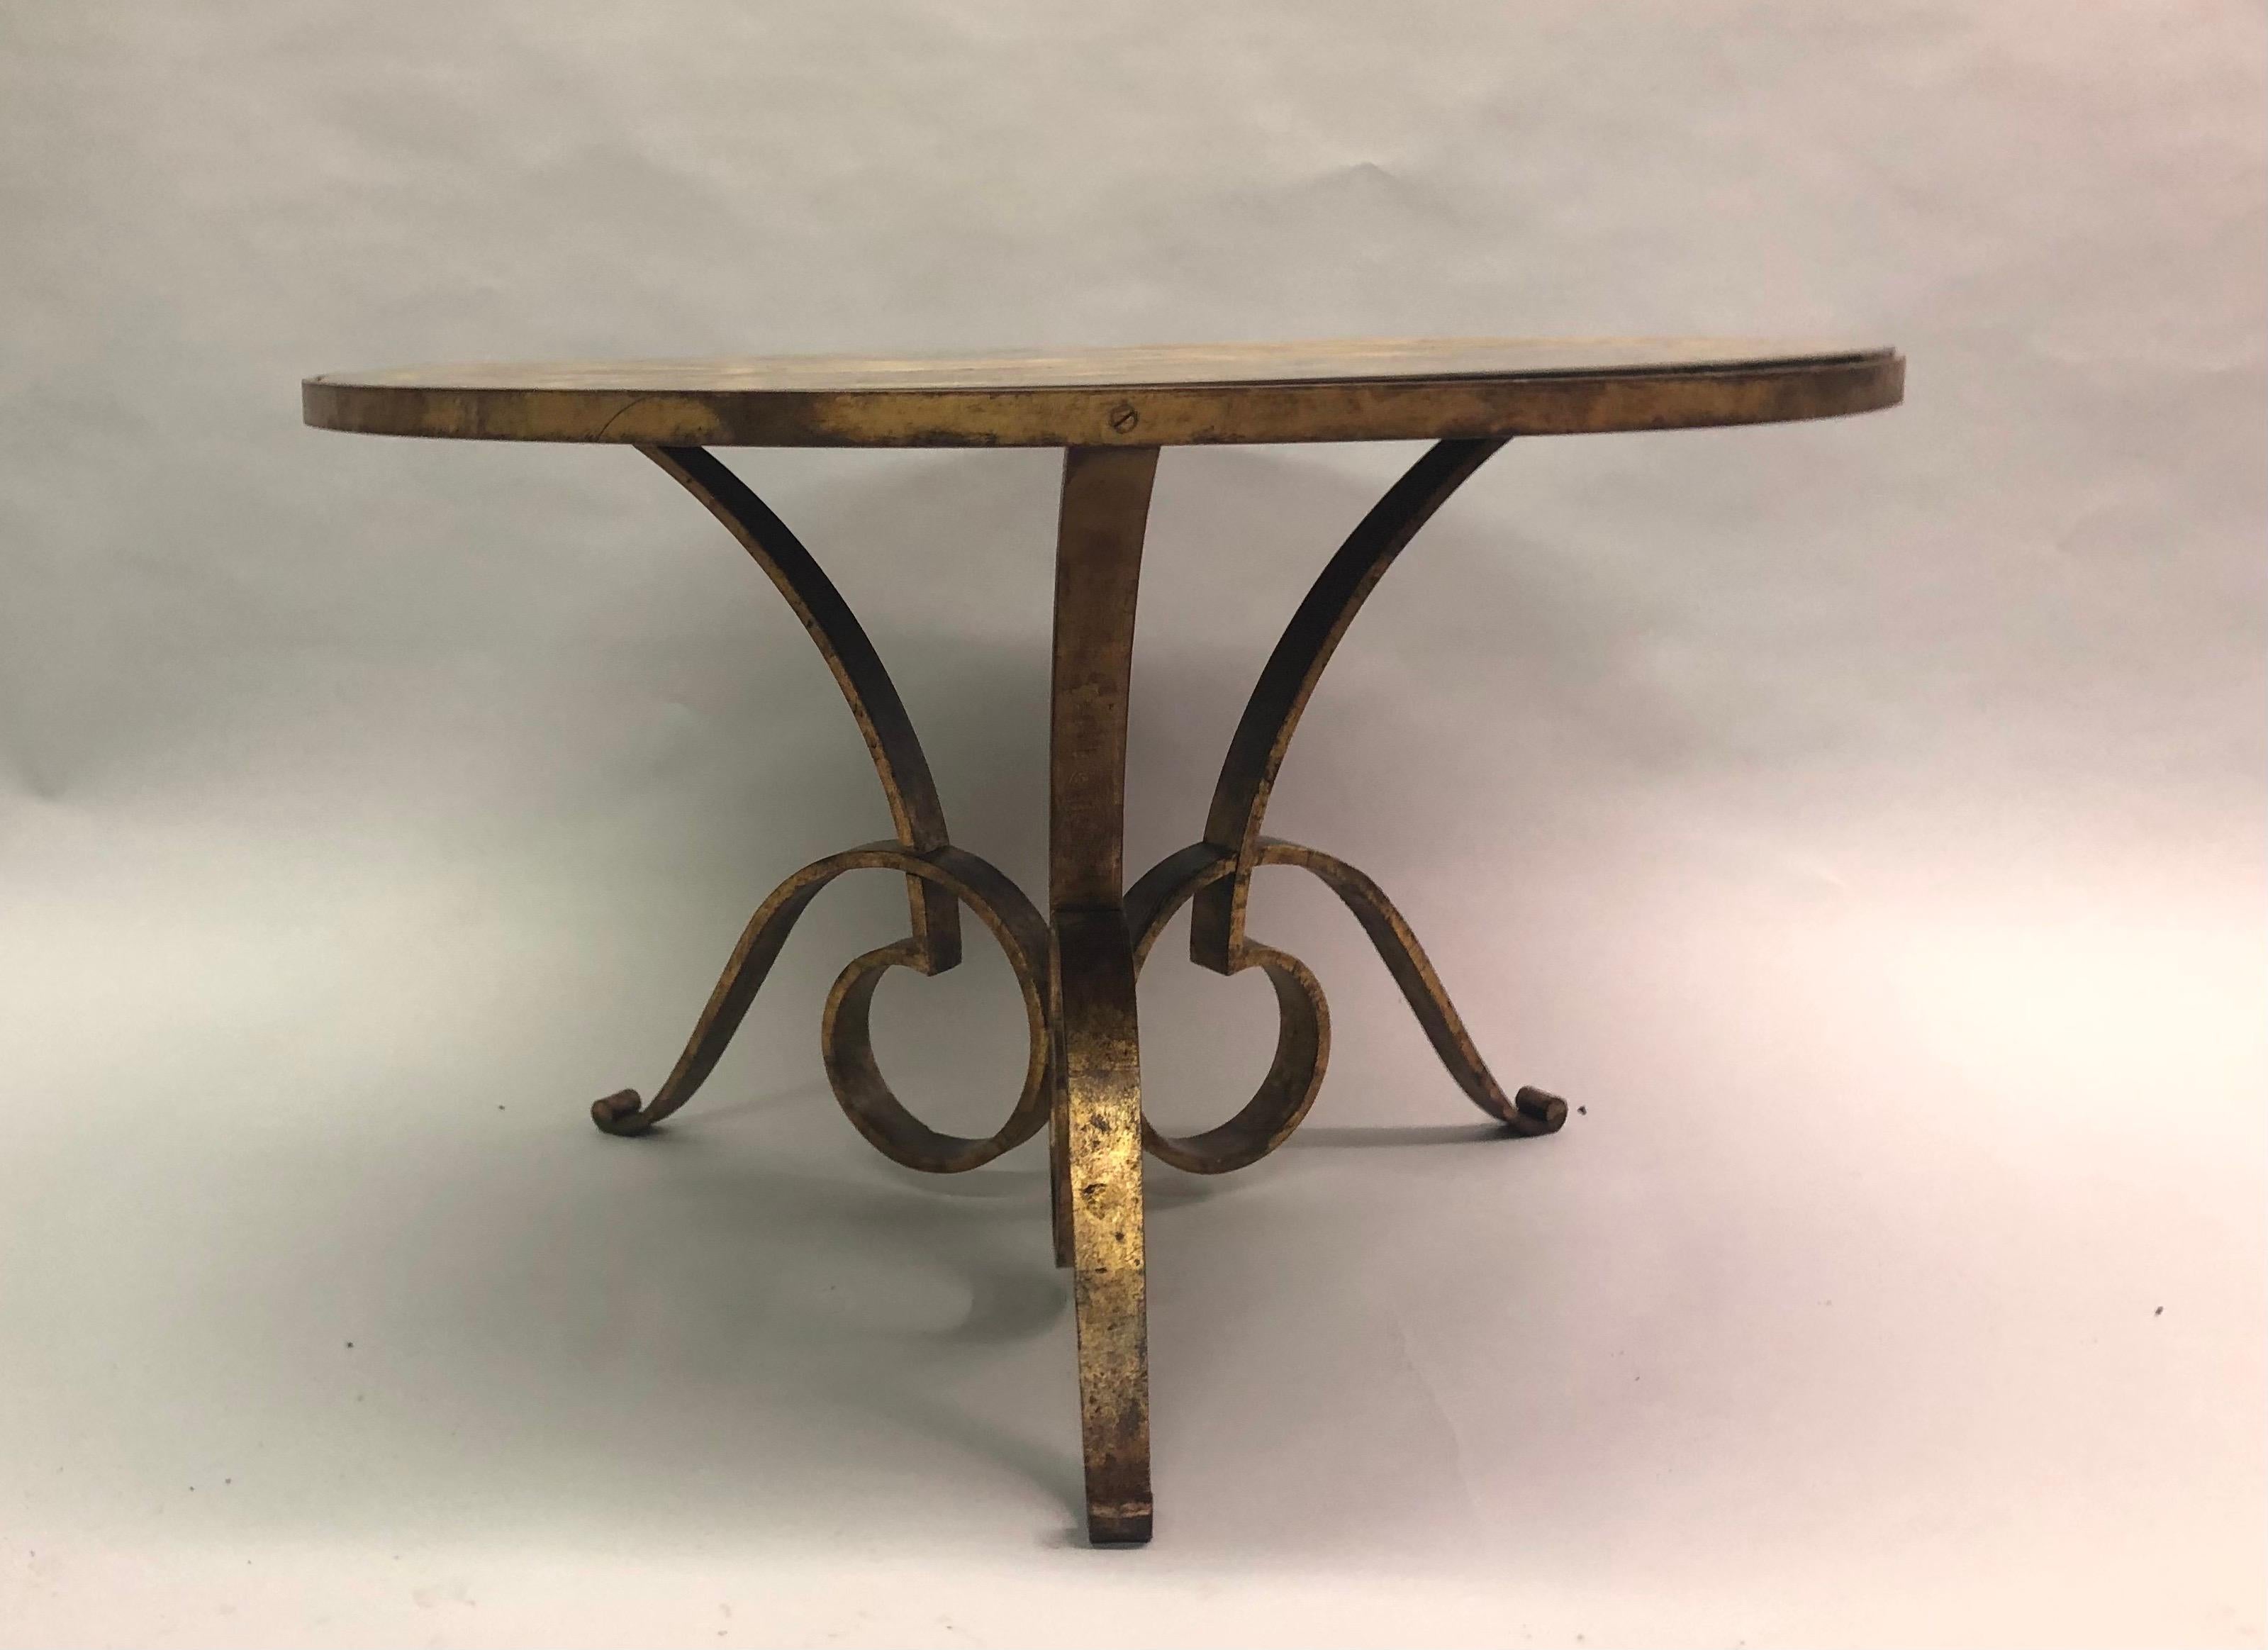 20th Century French Modern Neoclassical Gilt Wrought Iron Coffee / Side Table by Rene Drouet For Sale